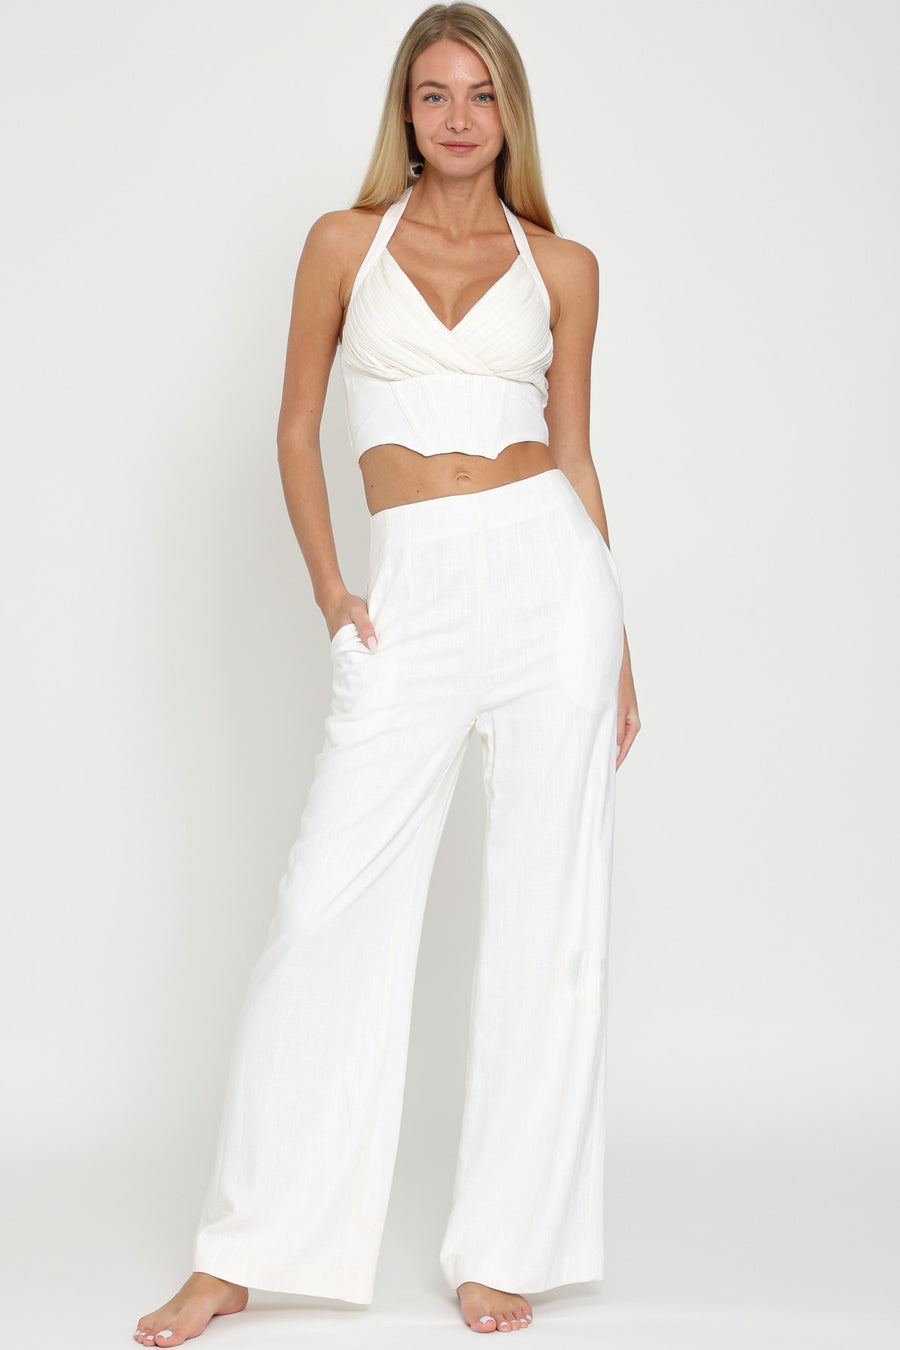 Pairs with the matching Zari Top Featuring a Mid rise loose fit pant with a back zipper detail in the color off white 